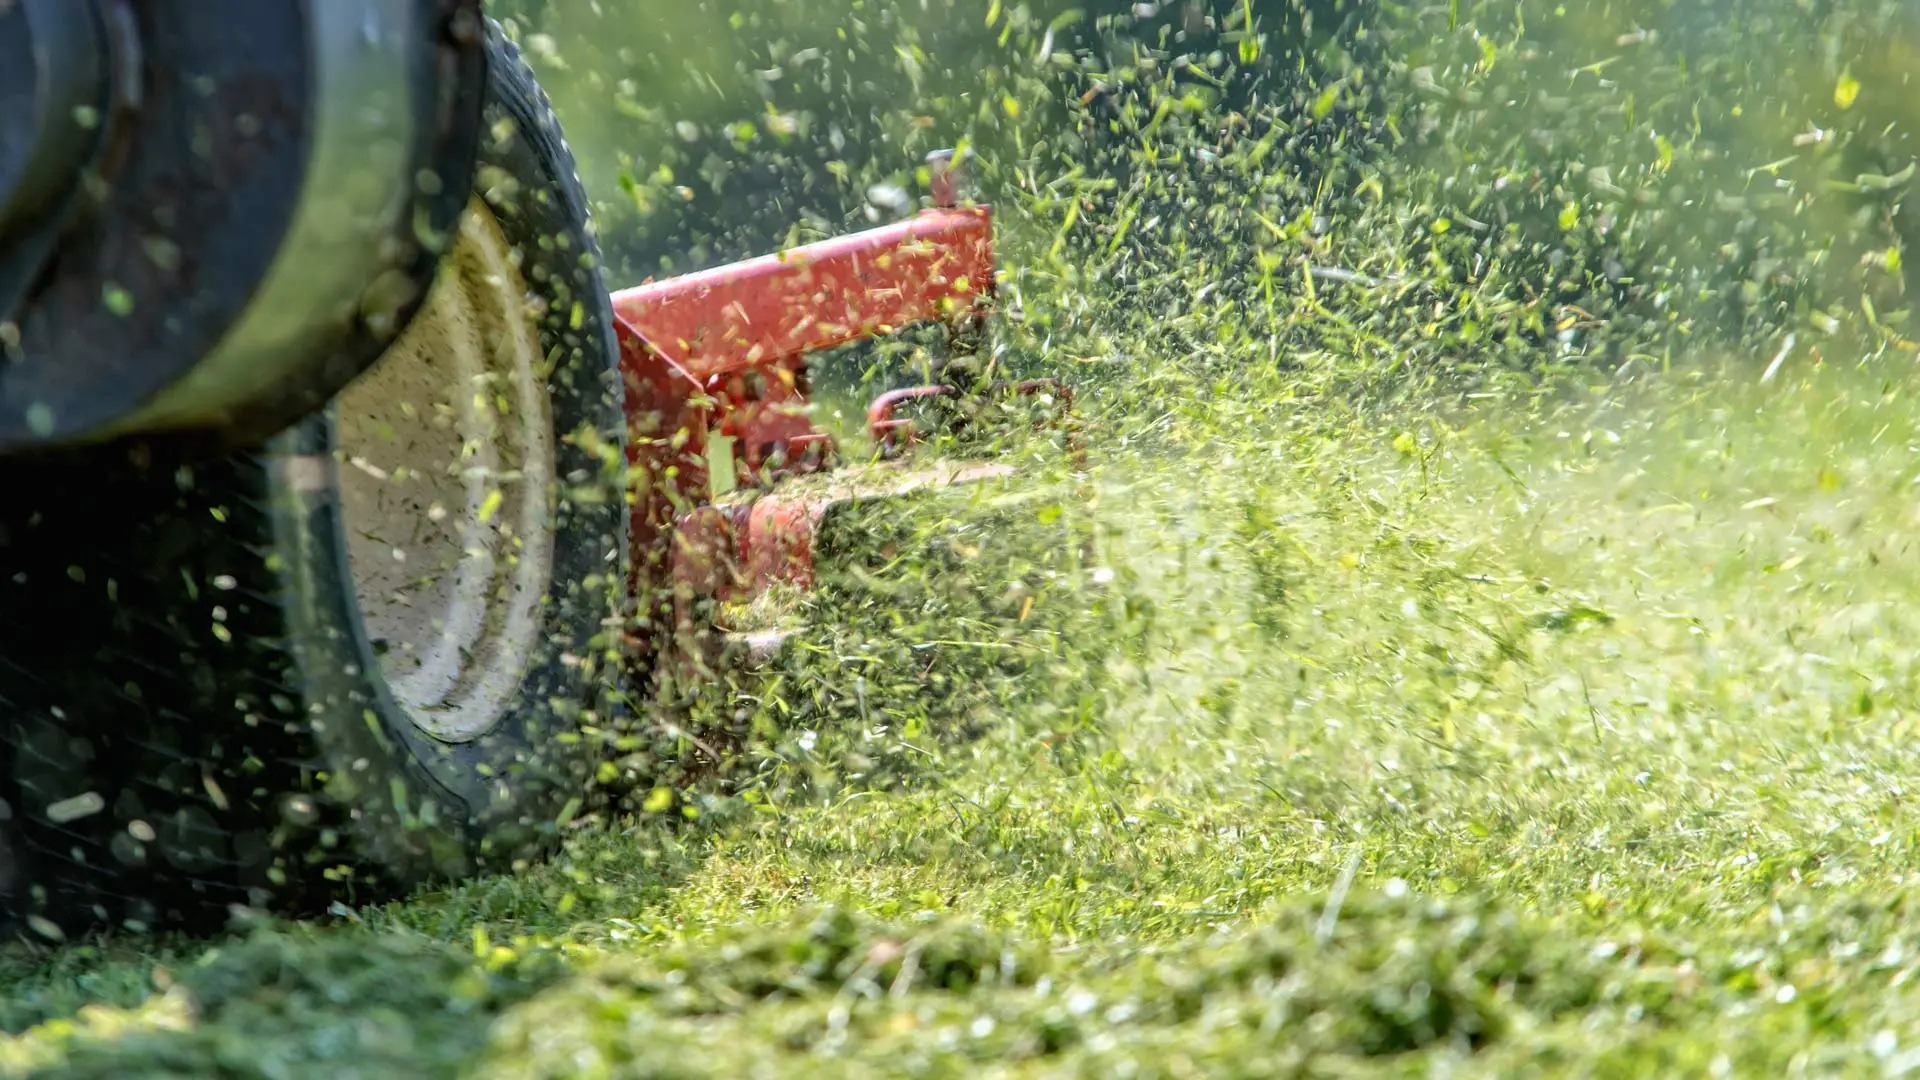 Should You Bag or Mulch Your Grass Clippings When Mowing Your Lawn?